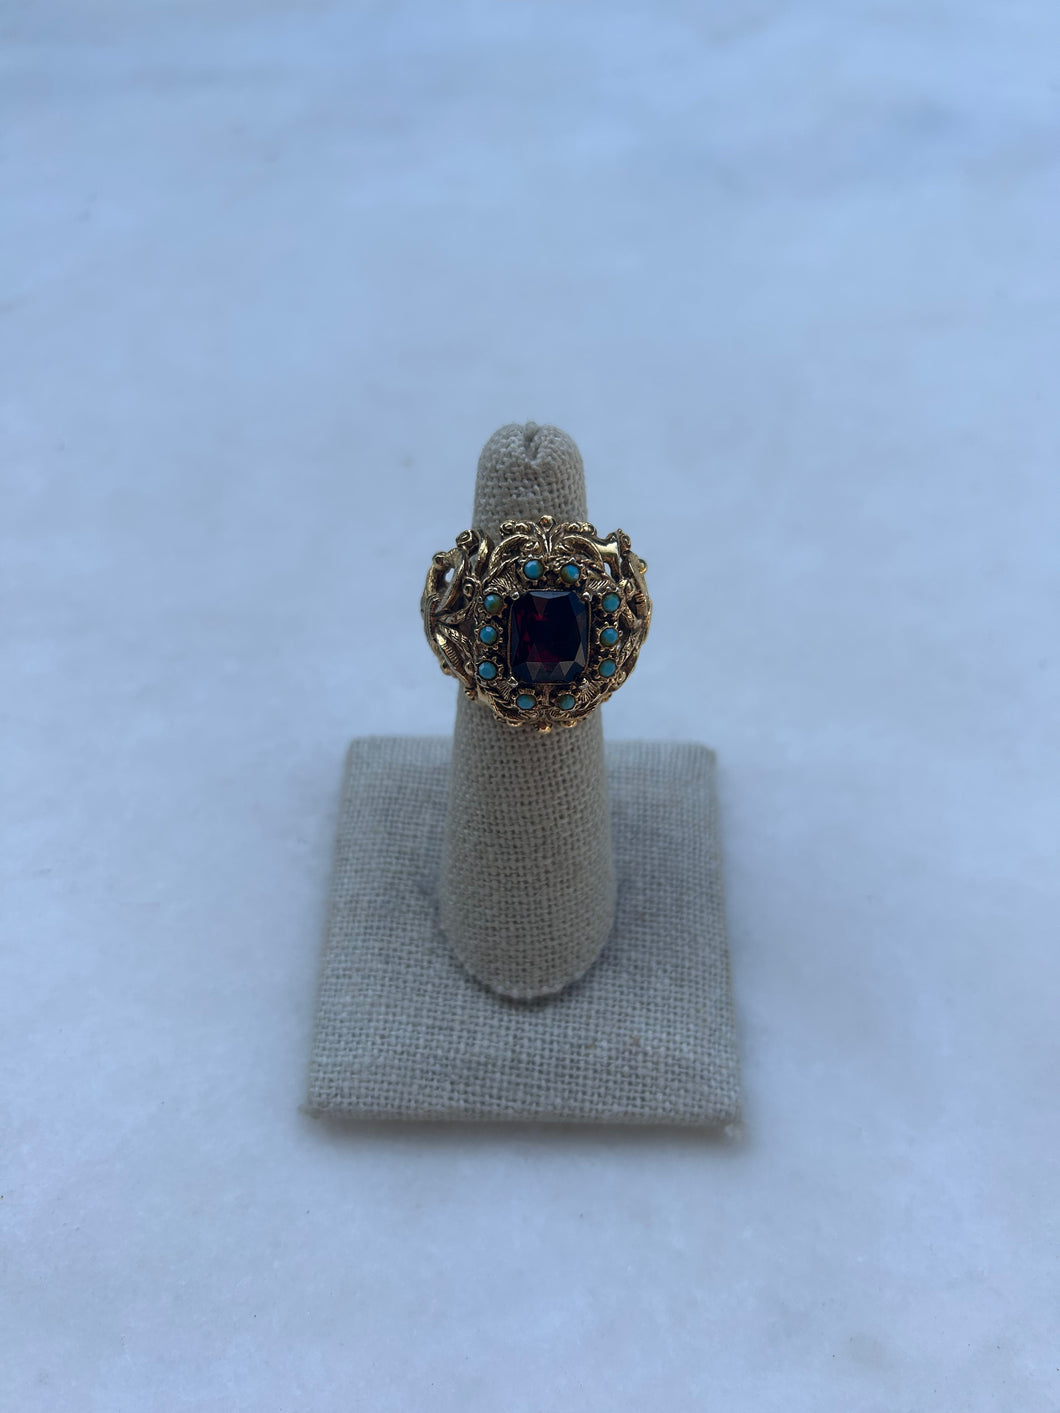 Vintage 14K Gold Ring with Diamonds, Sapphires and Ruby Center